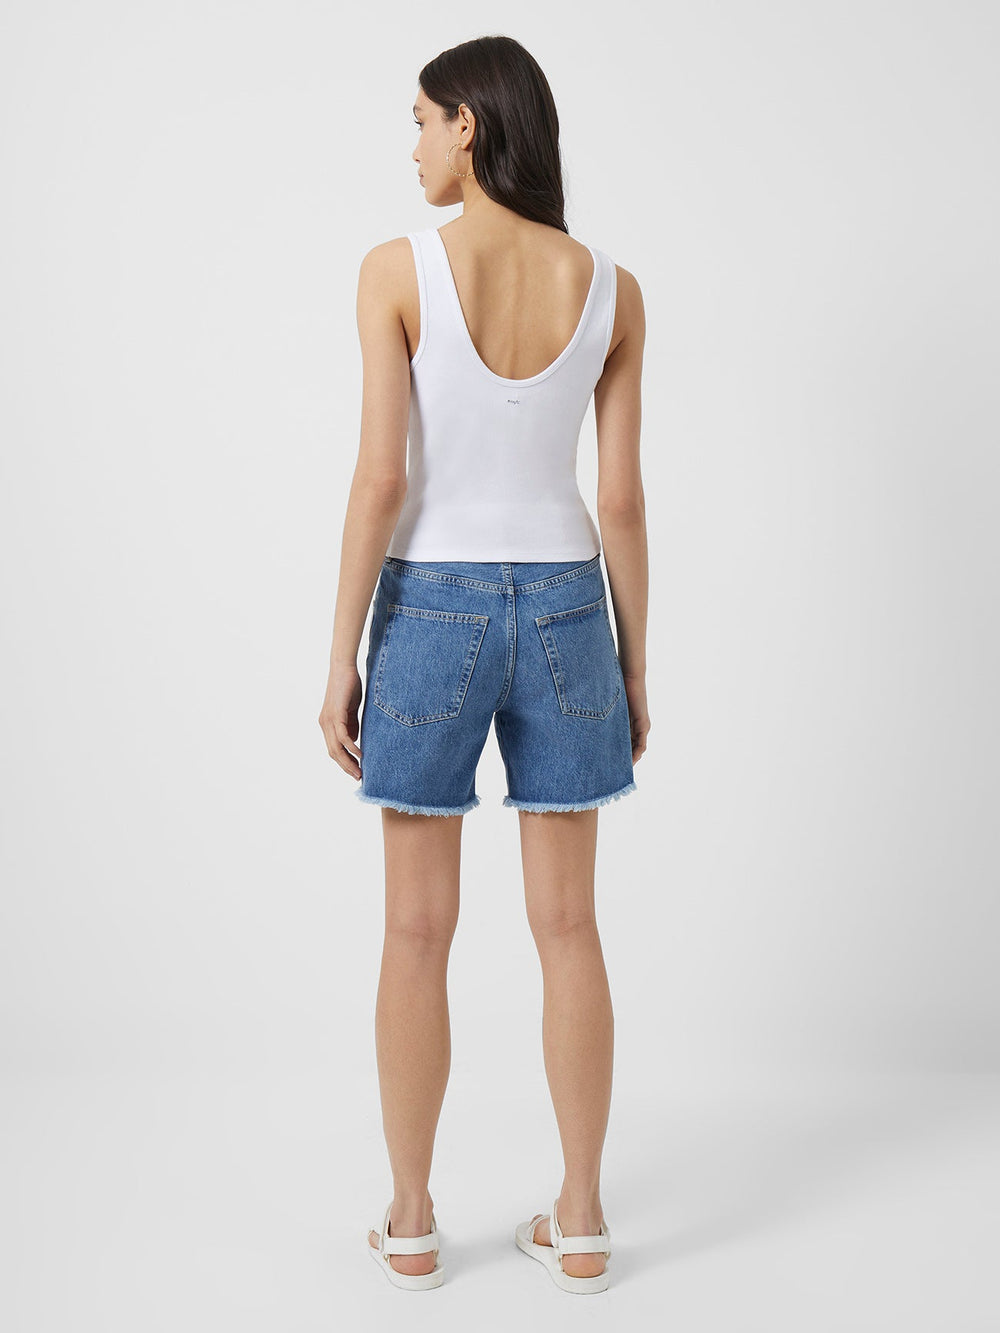 La Glace Ribbed Vest Top | French Connection UK